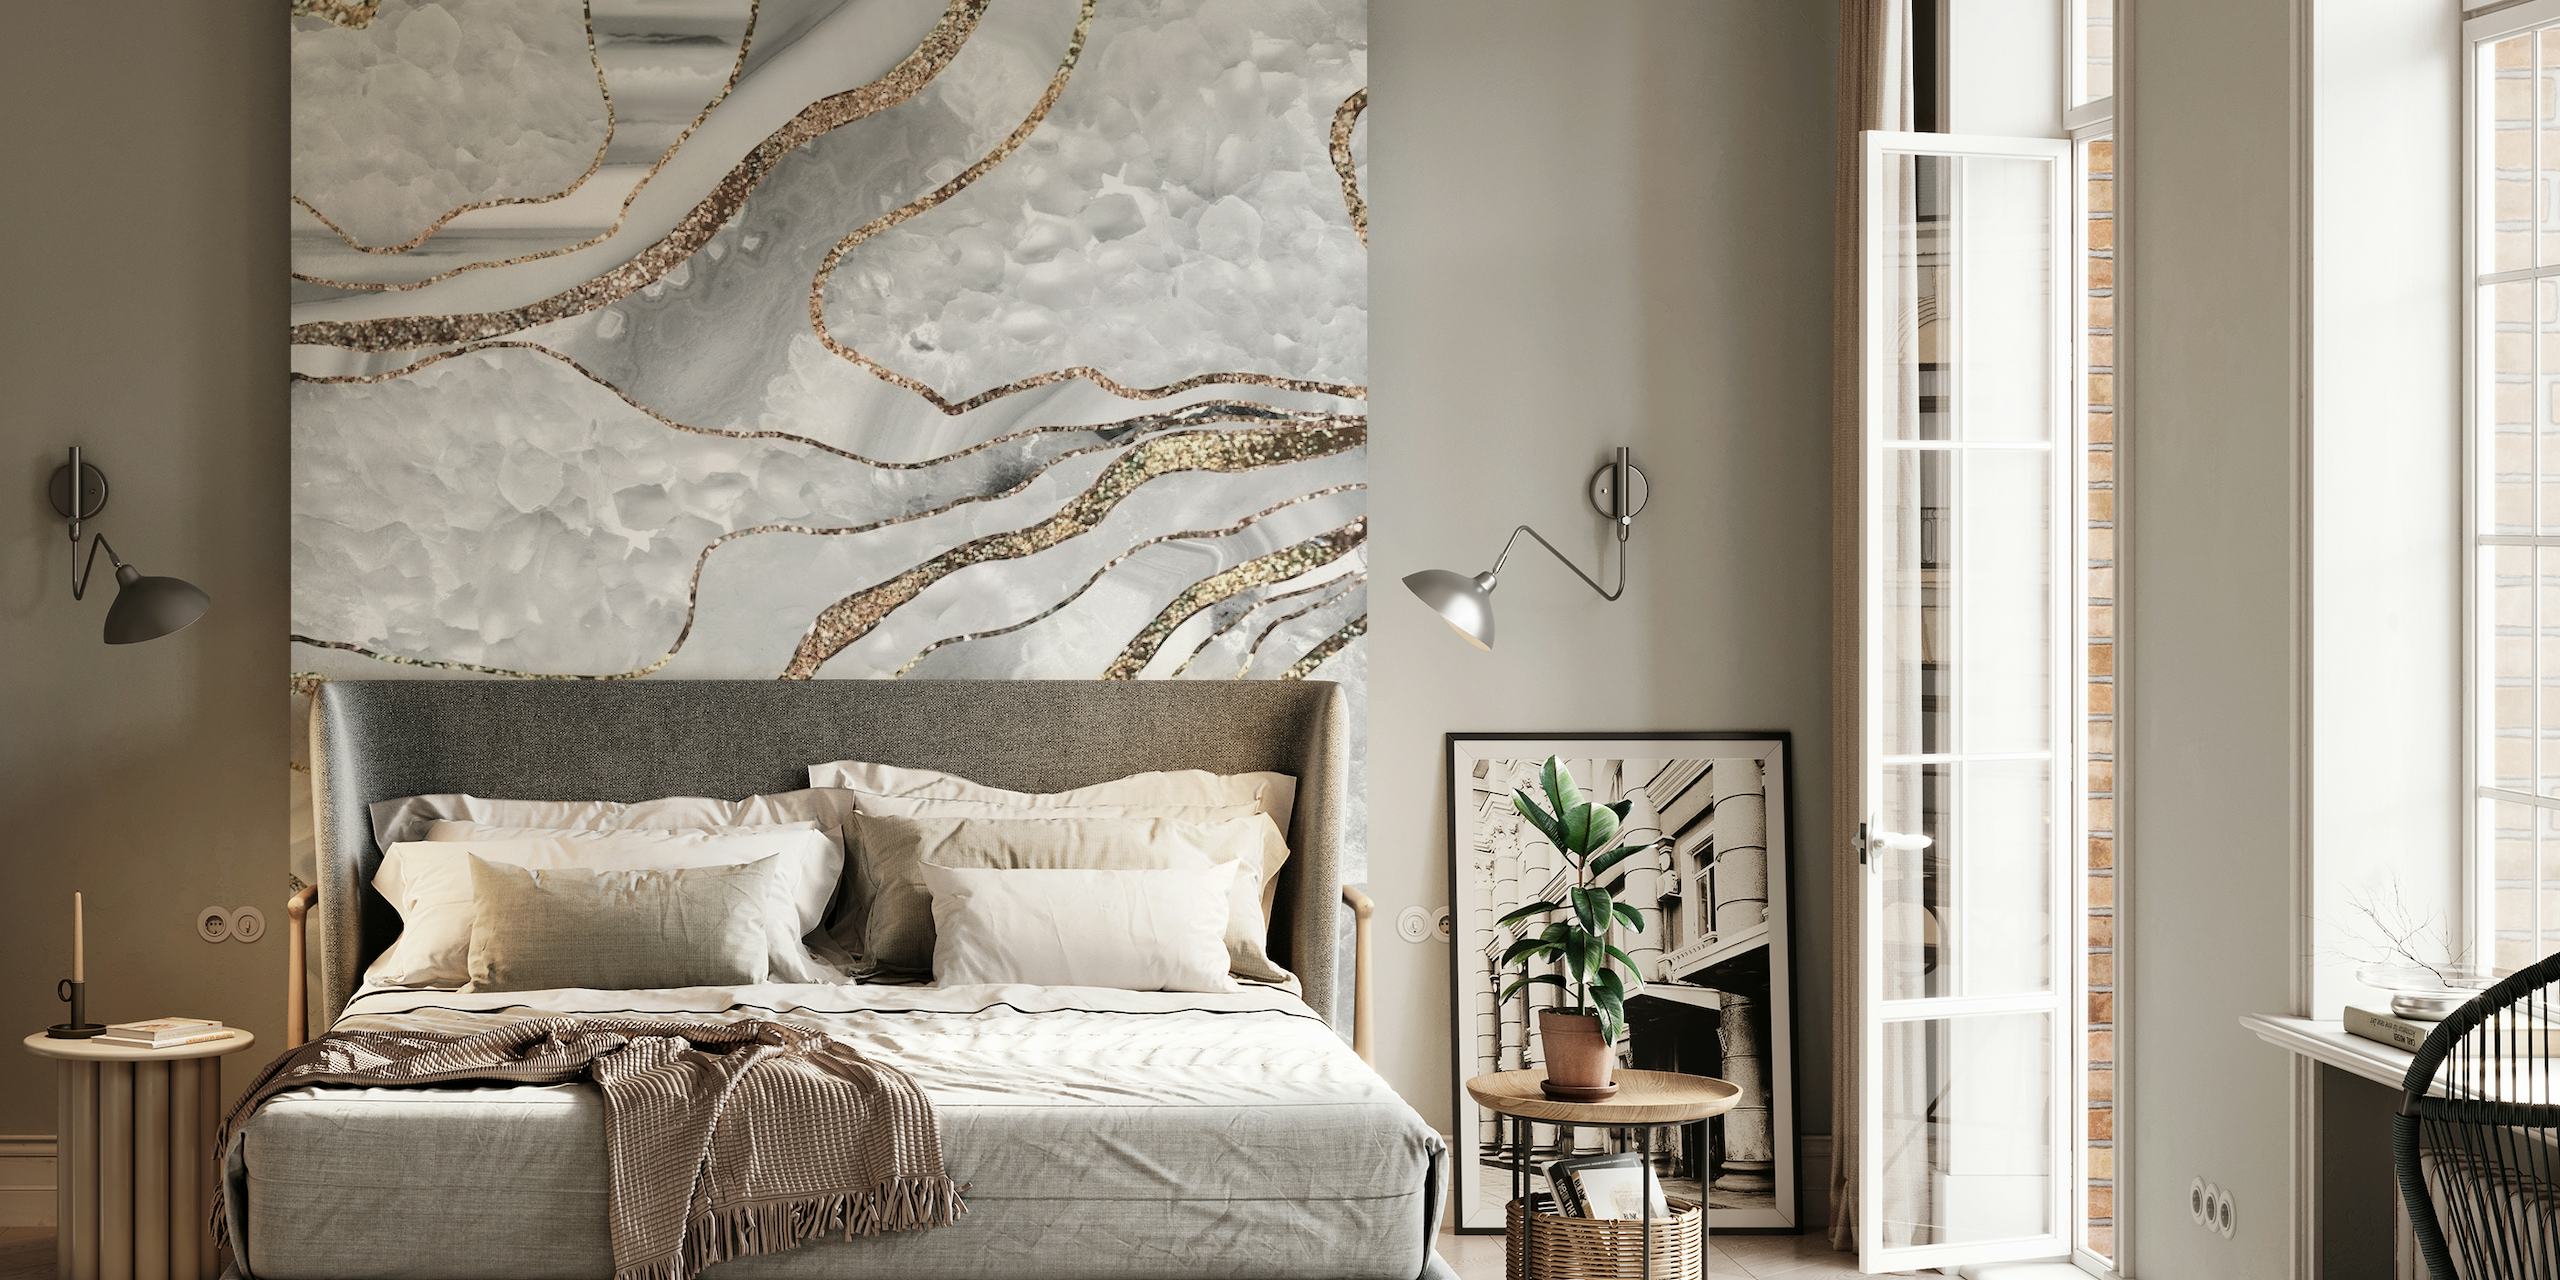 White and gold agate-patterned wall mural with glitter accents